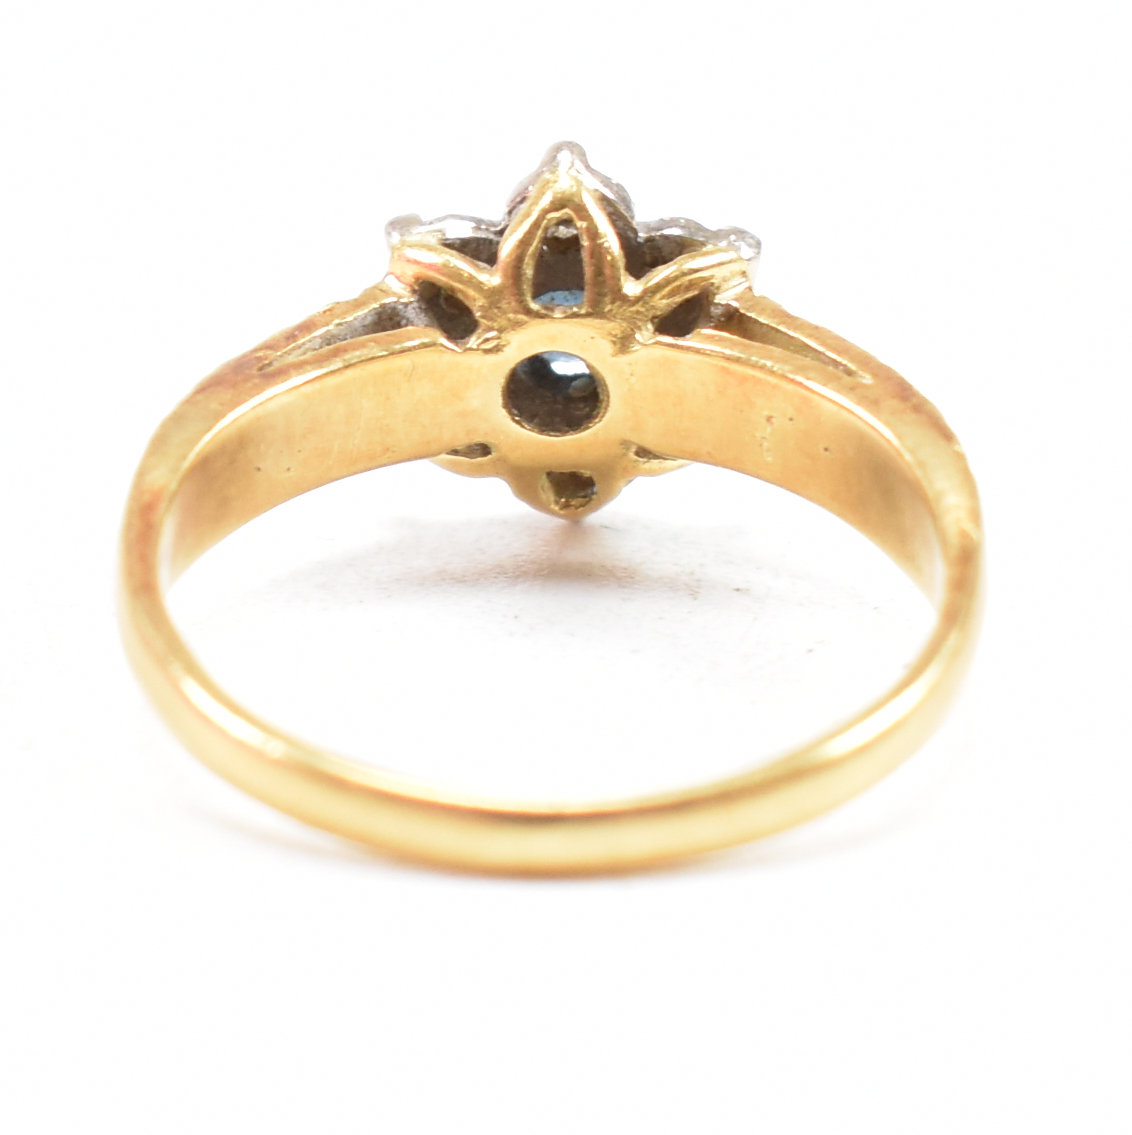 HALLMARKED 18CT GOLD SAPPHIRE CLUSTER RING - Image 4 of 9